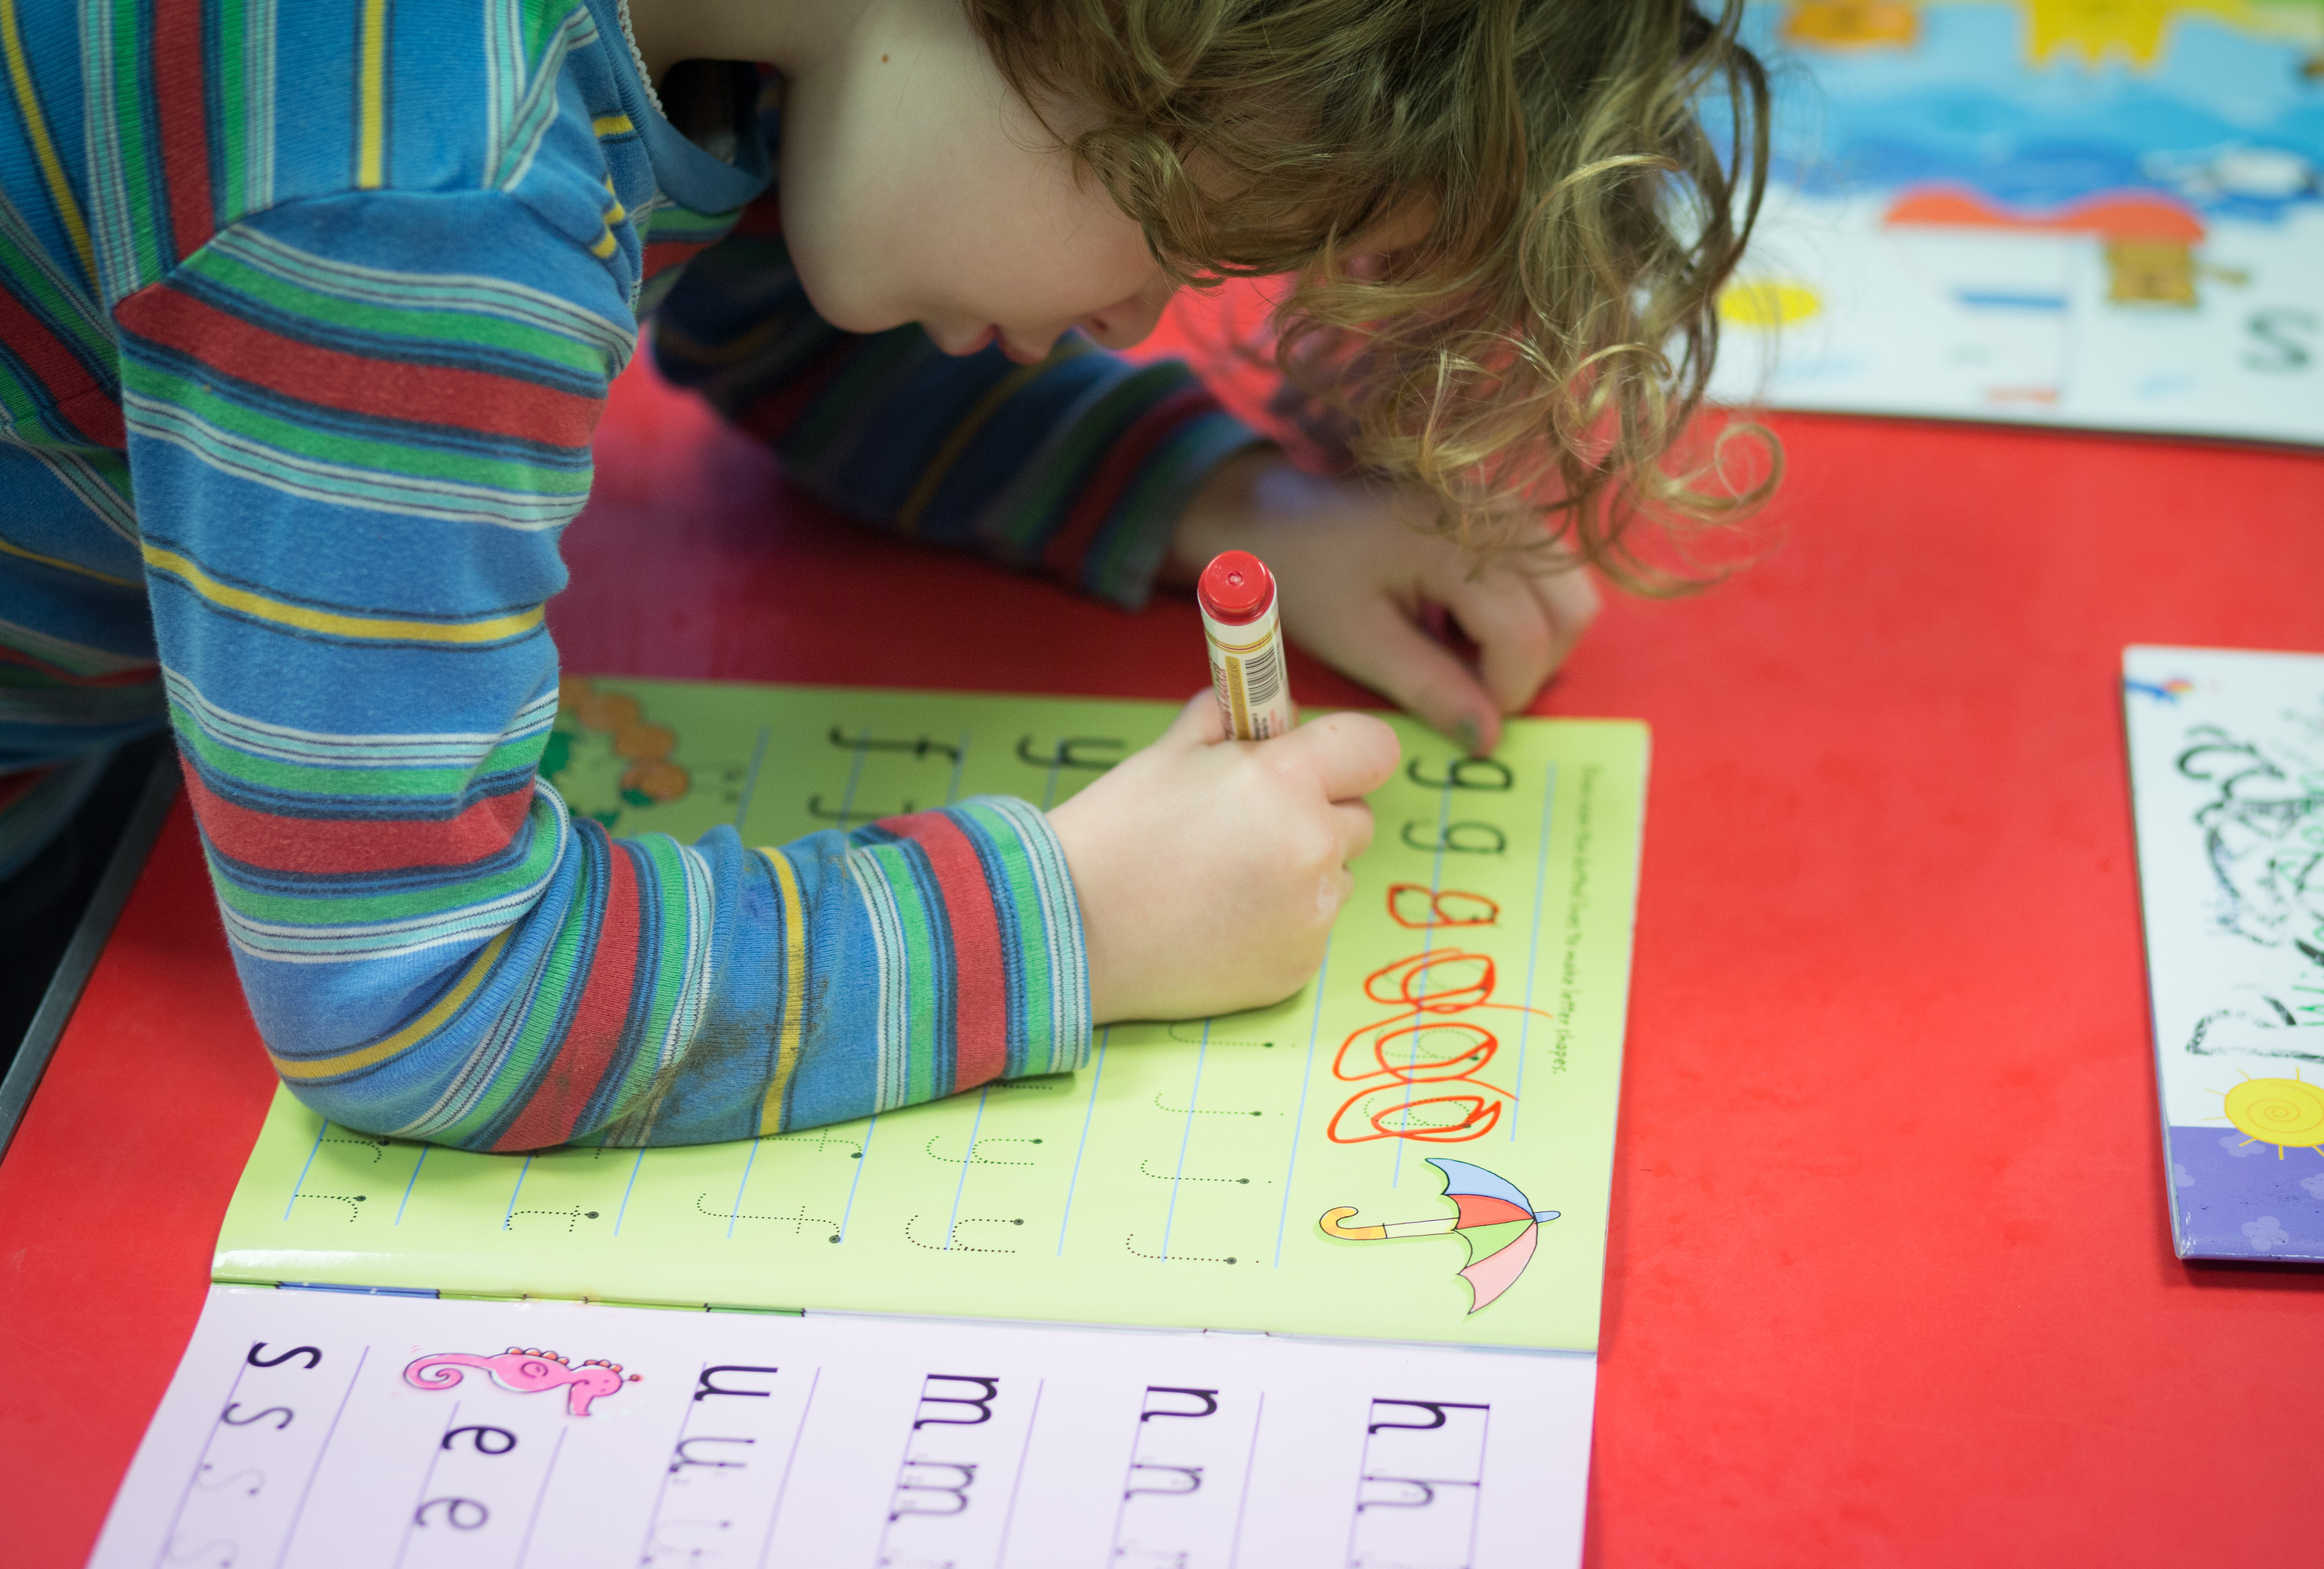 A pre-school aged child practices lettering.